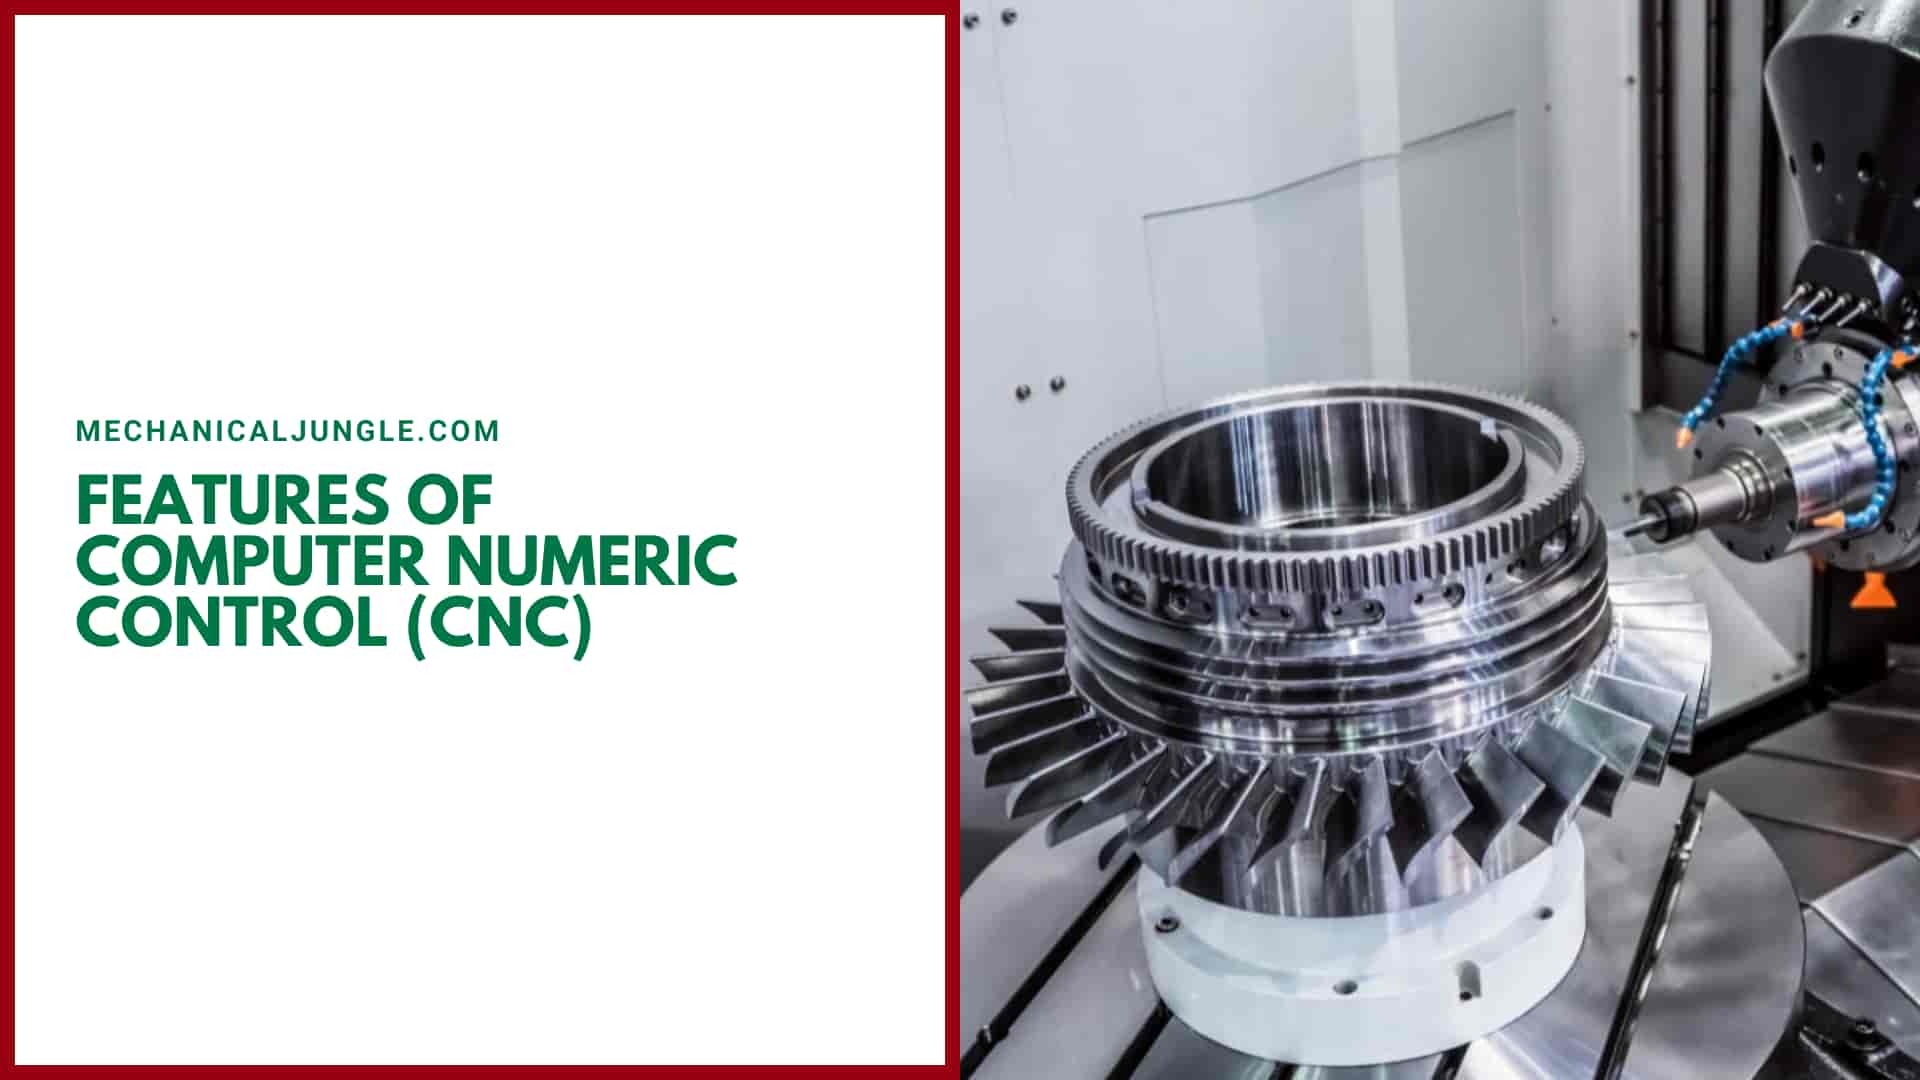 Features of Computer Numeric Control (CNC)